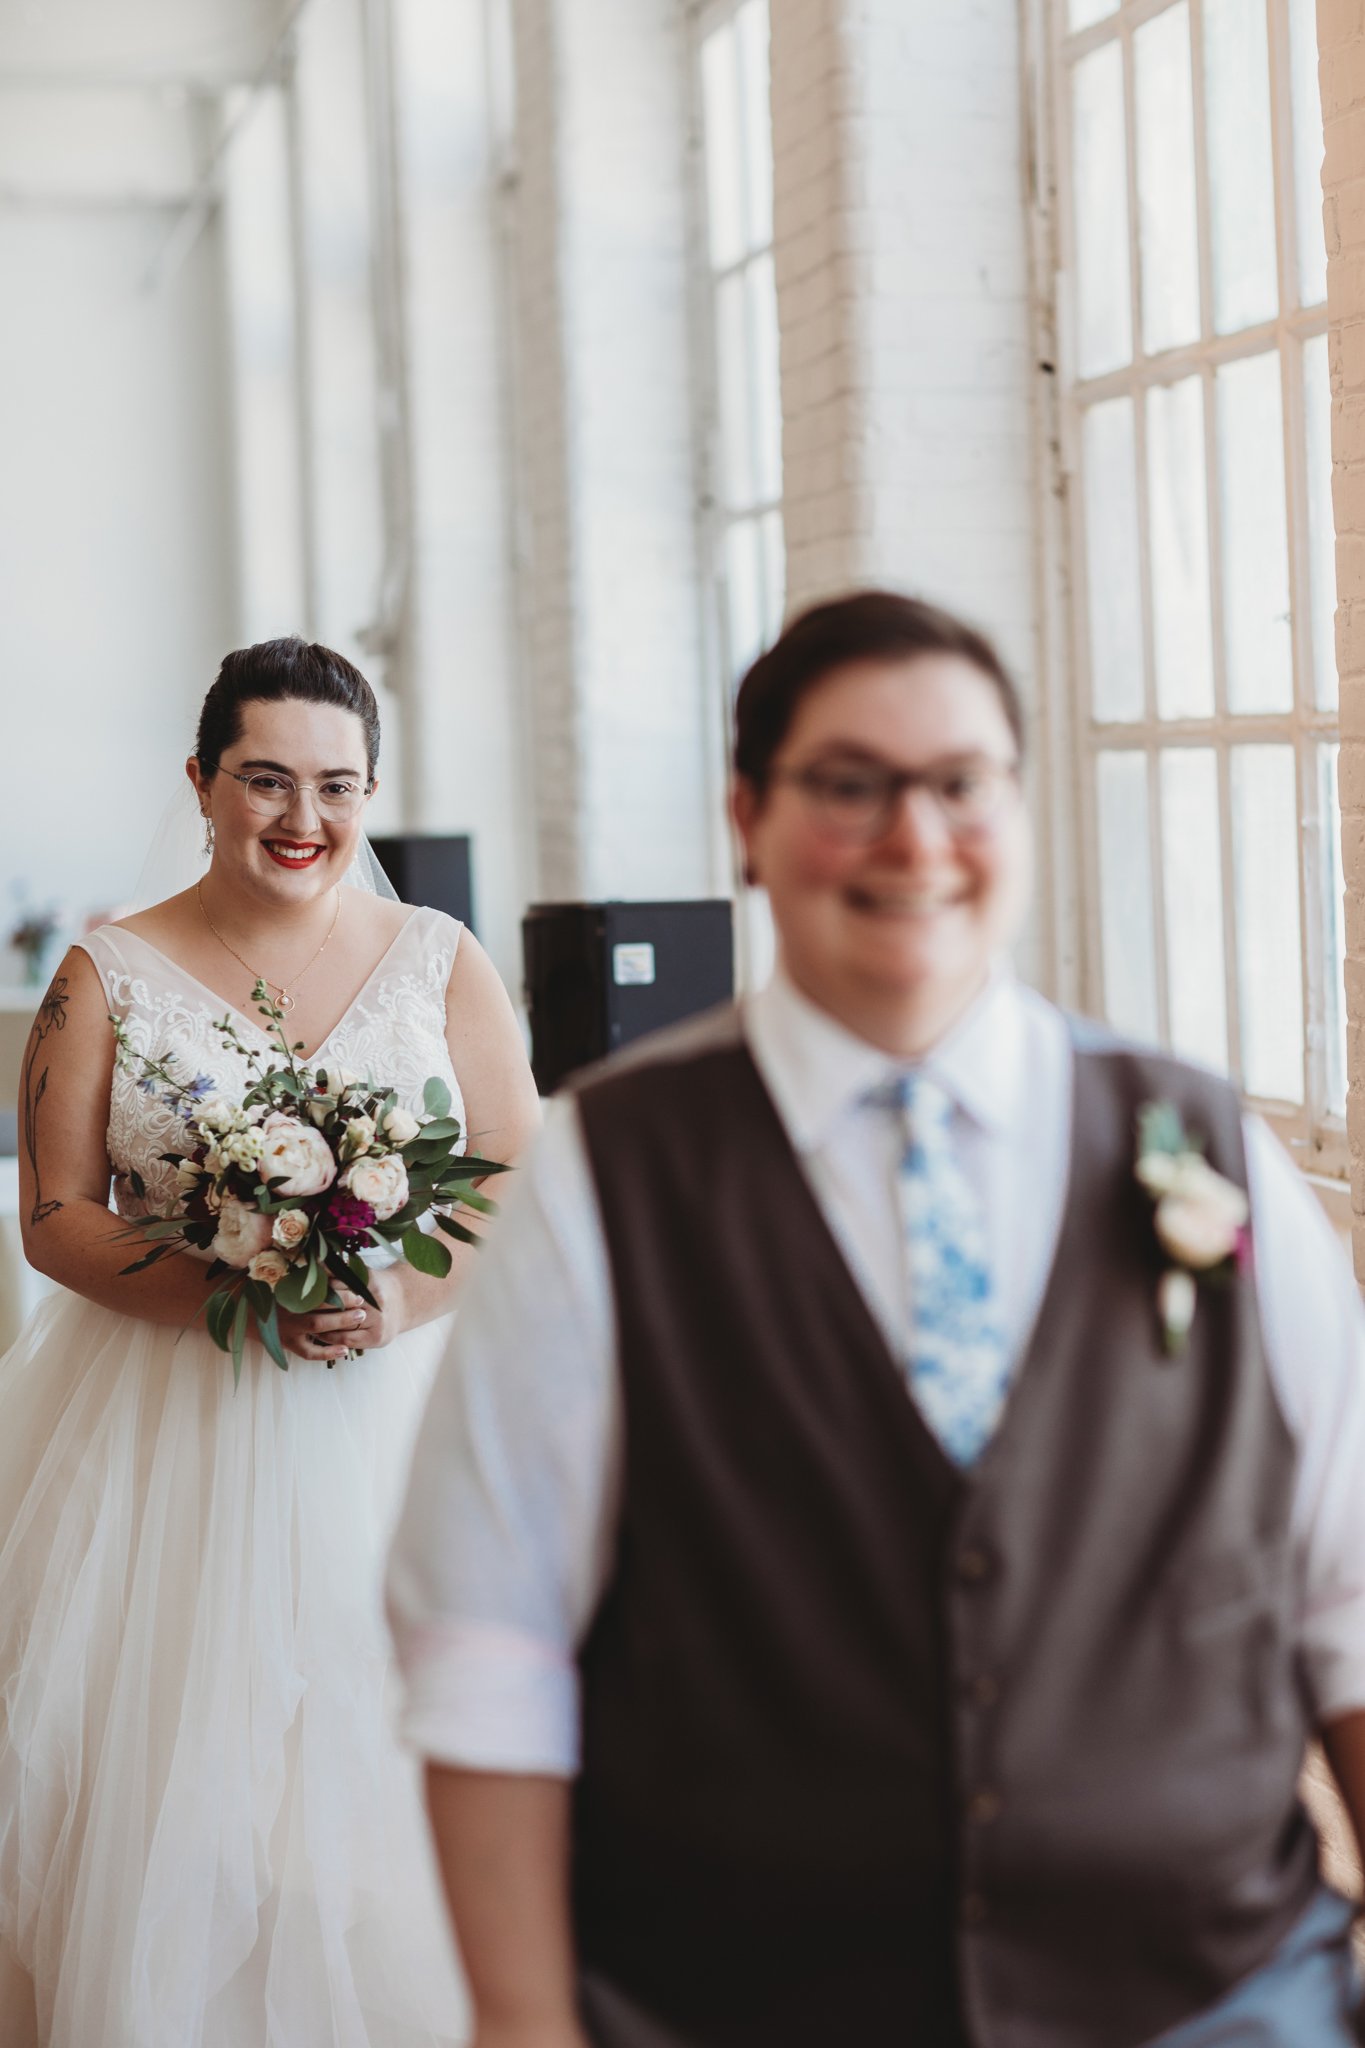 Each married their favorite person: an early summer wedding at the Boylston Rooms!